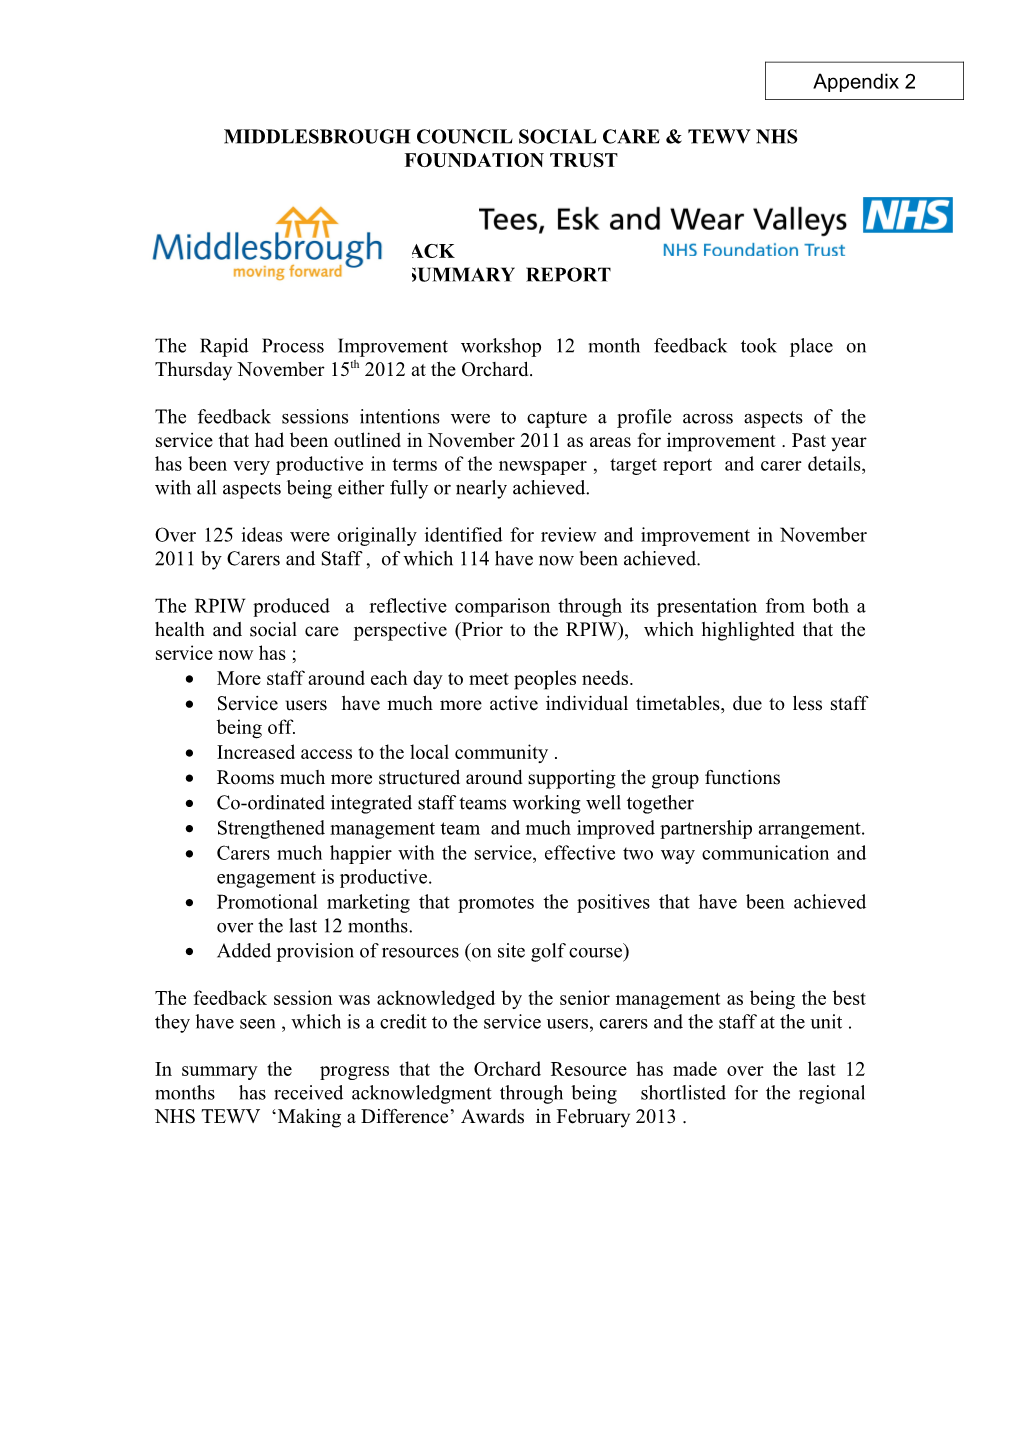 Middlesbrough Council Social Care & Tewv Nhs Foundation Trust